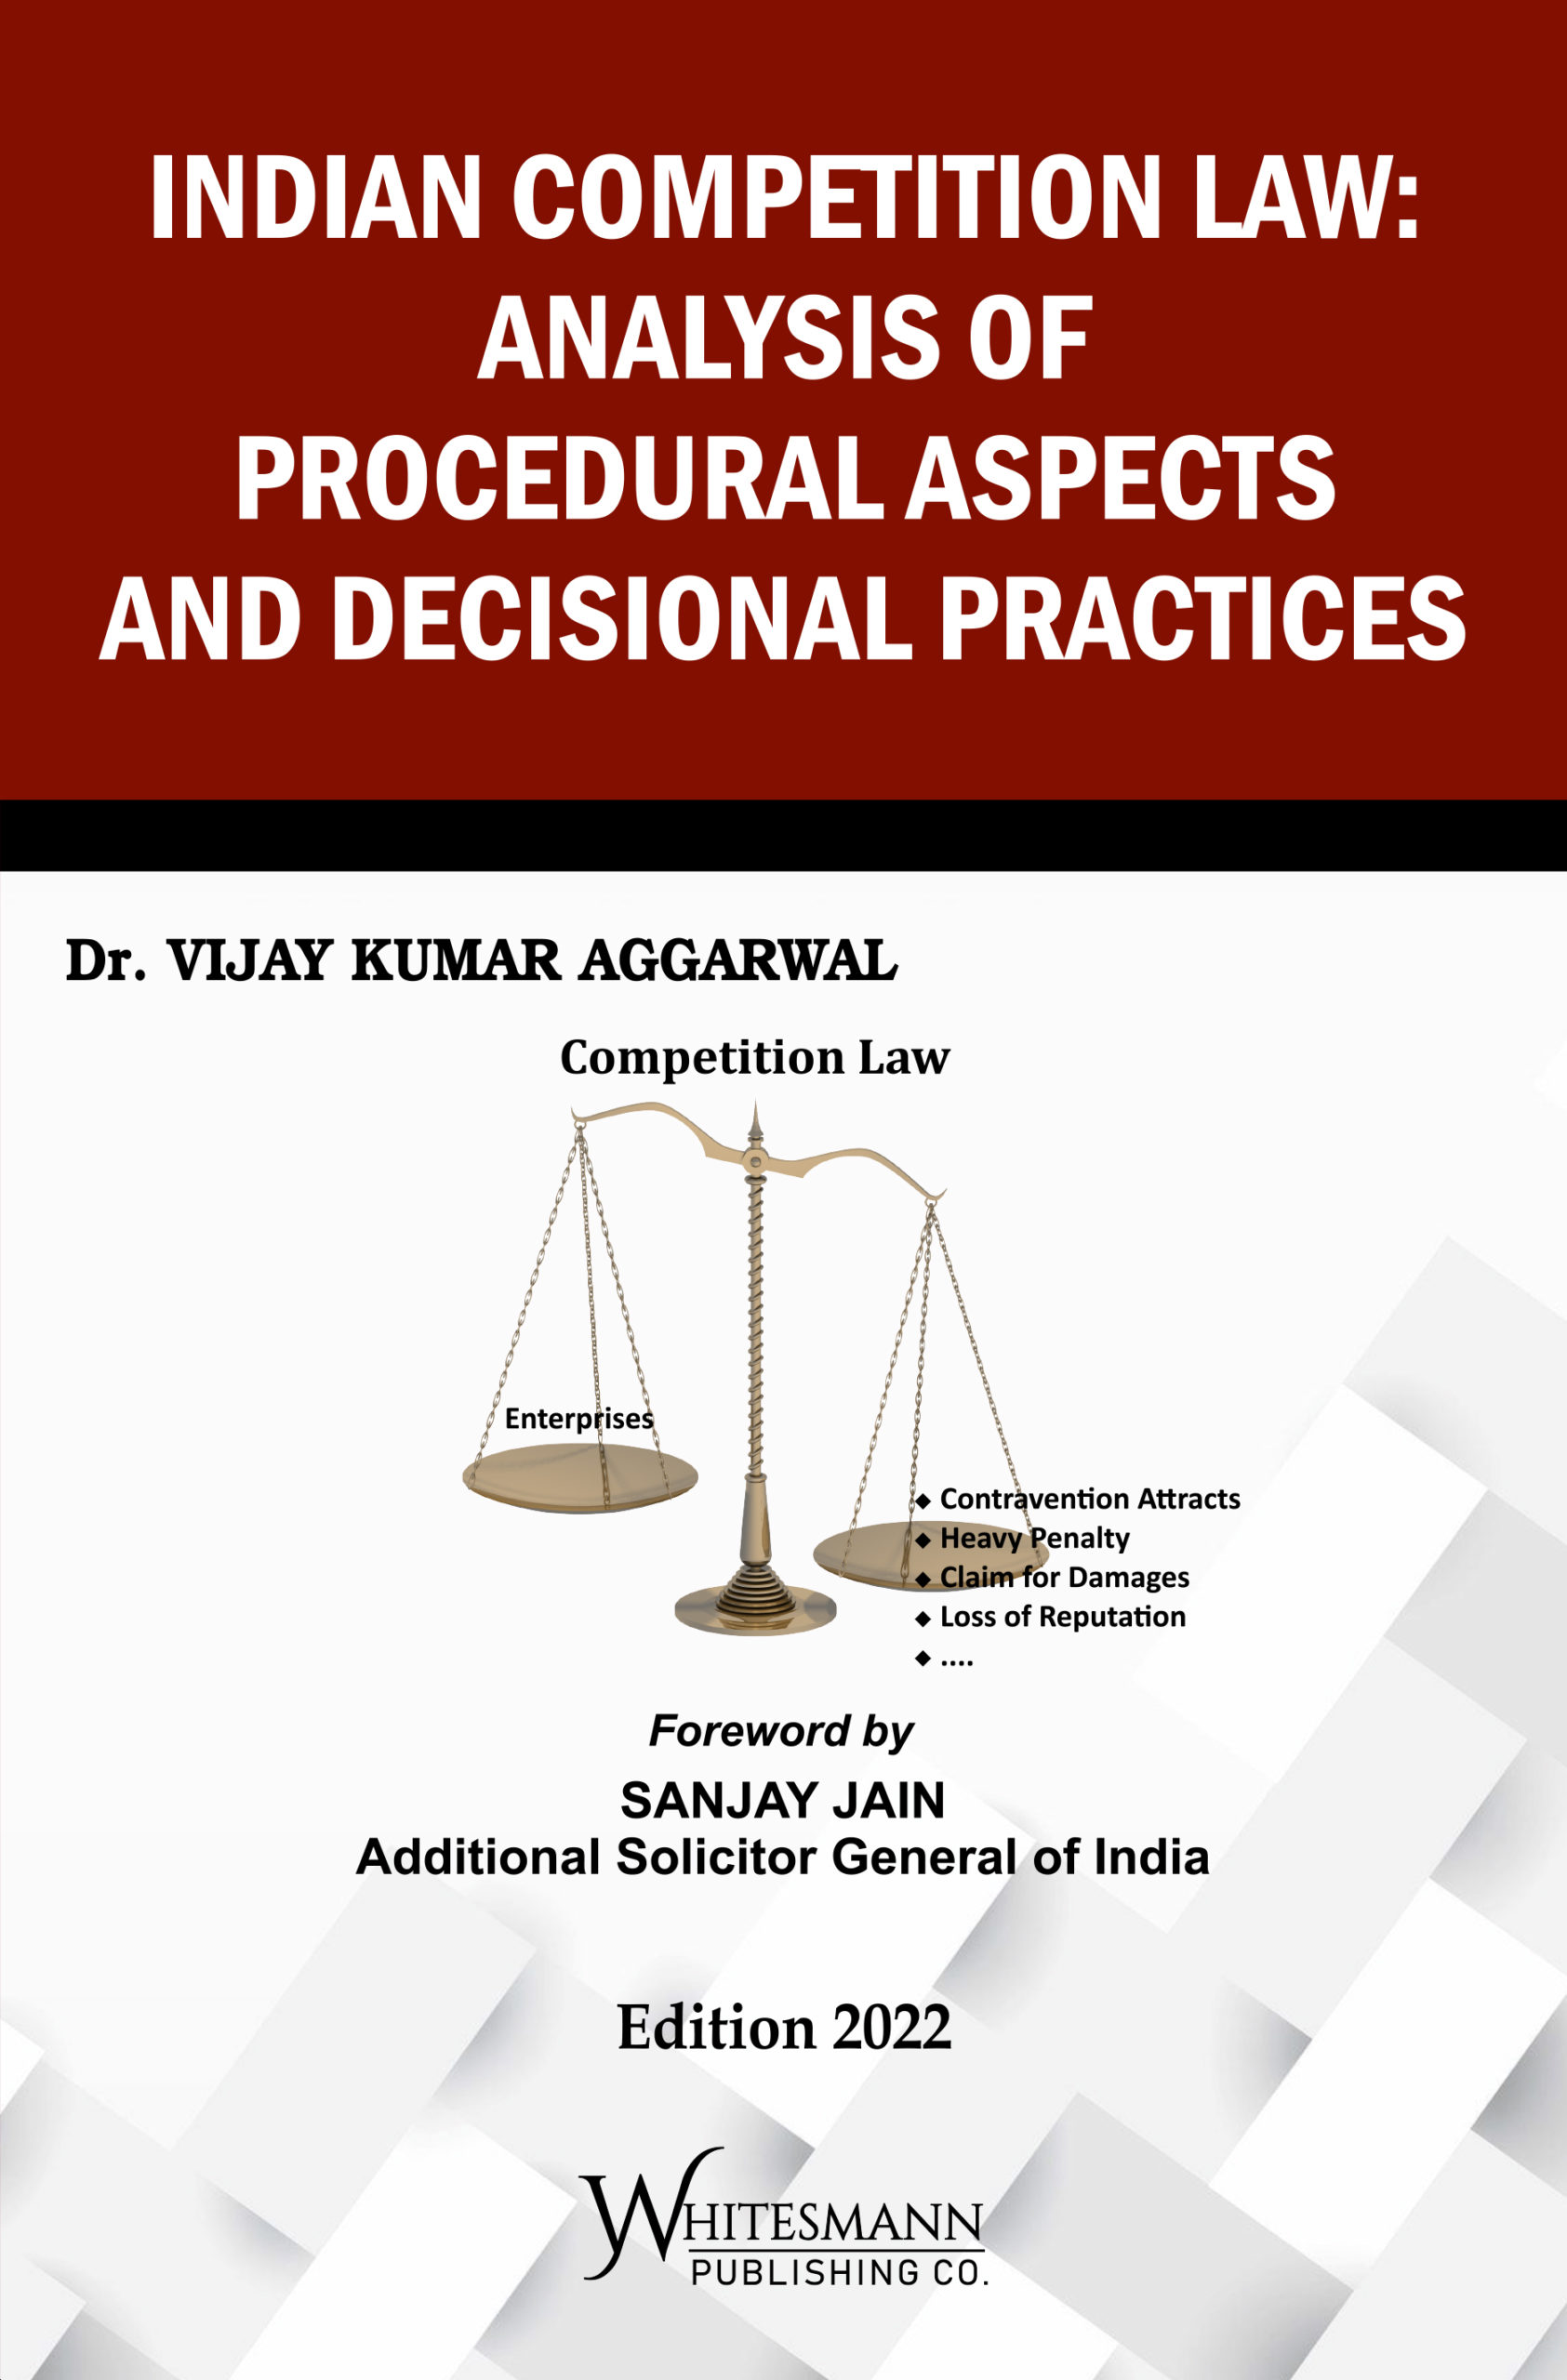 competition law research topics india